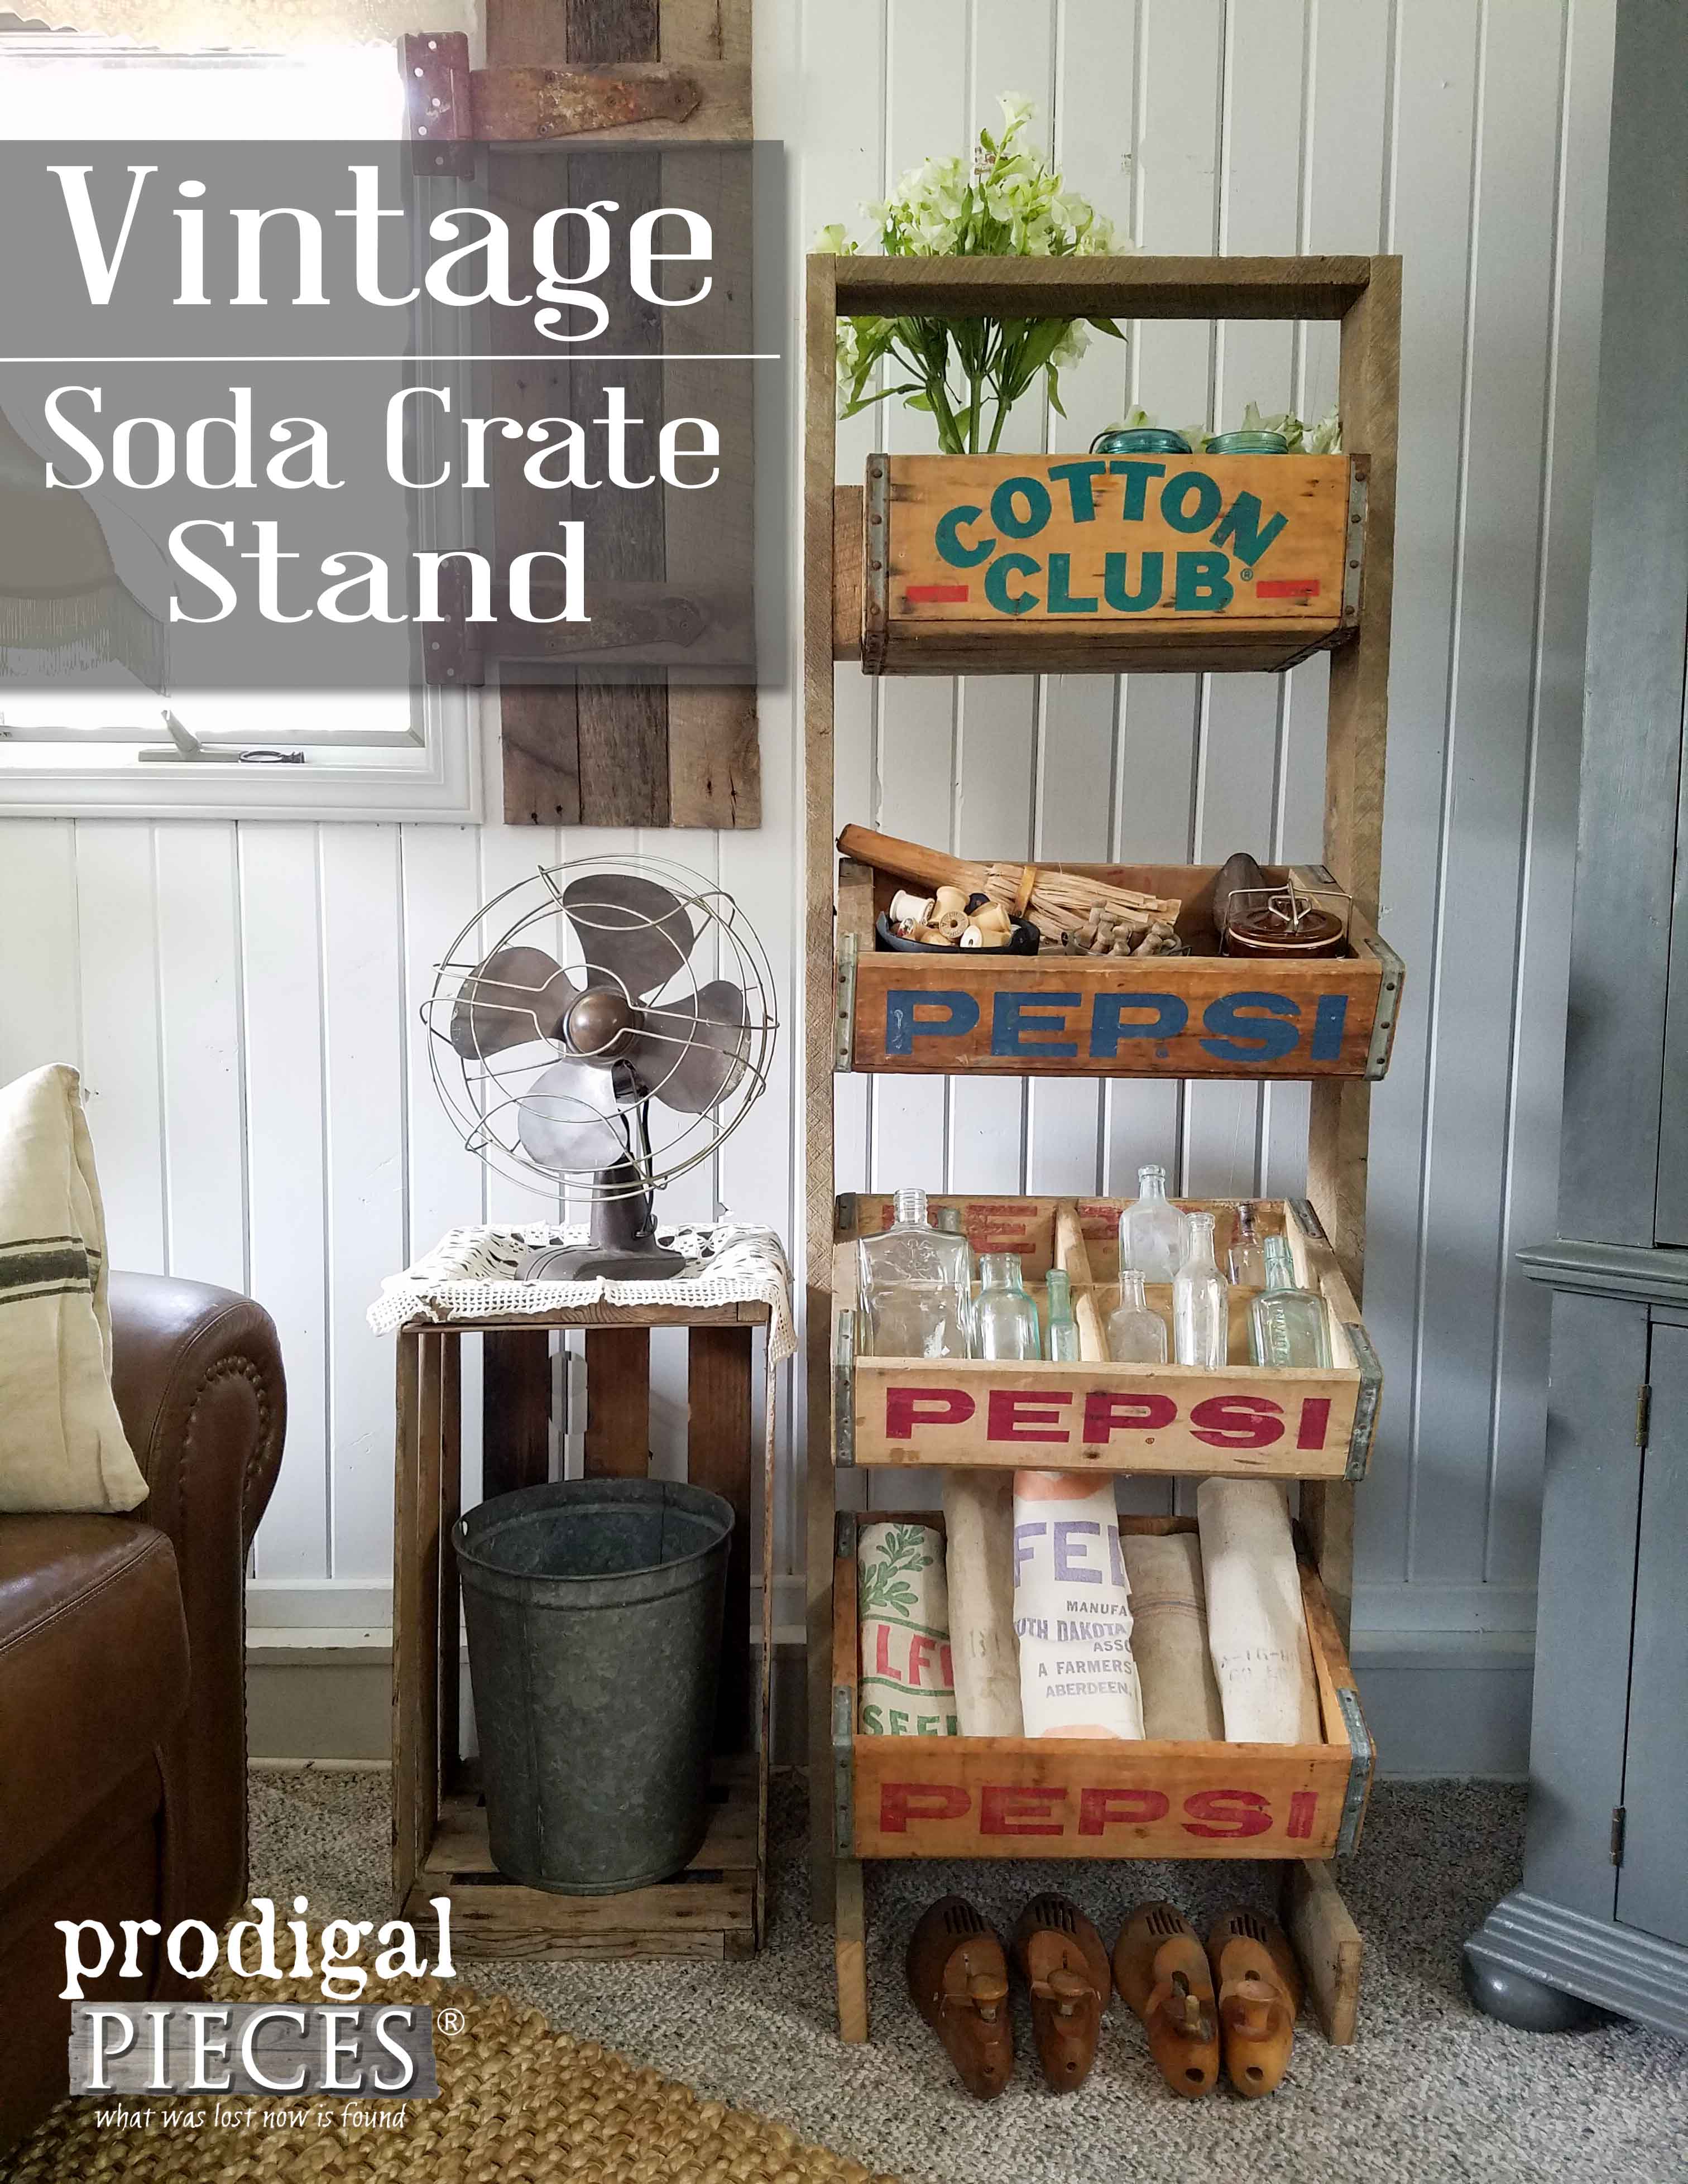 Create a Soda Crate Stand from Vintage Crates and Reclaimed Barn Wood for Home Decor or Shop Display by Prodigal Pieces | www.prodigalpieces.com